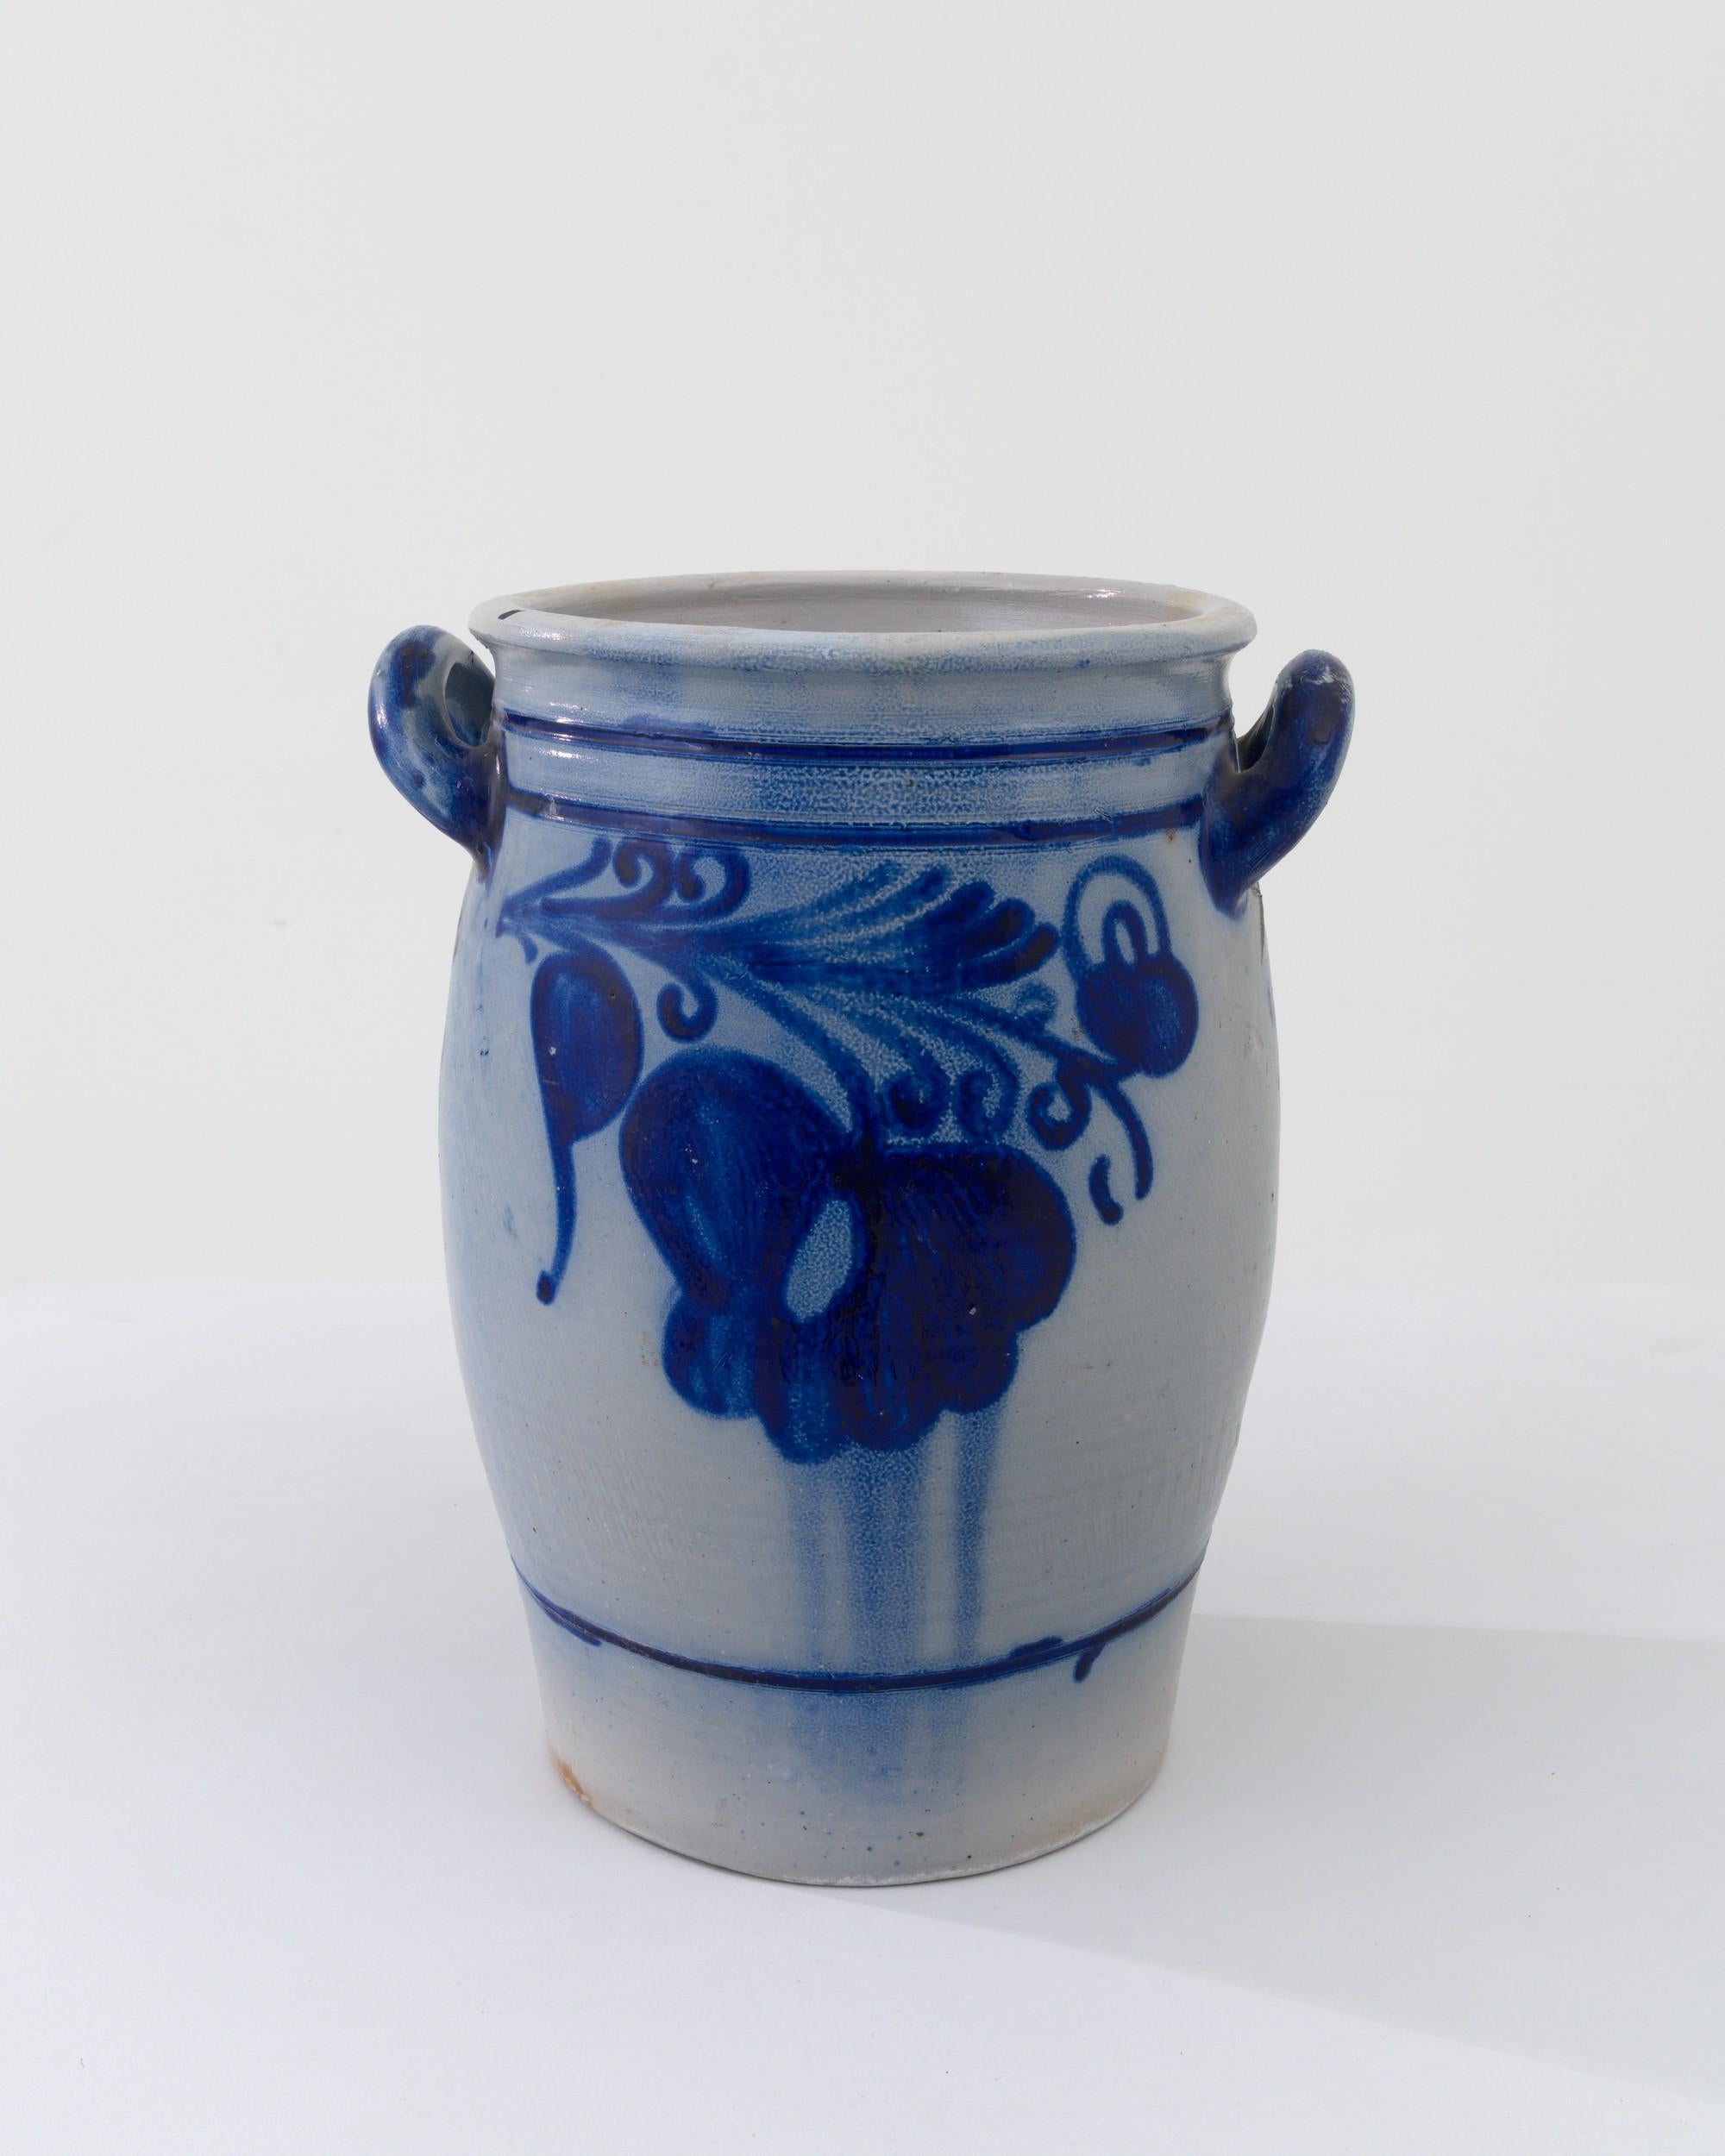 A typical country pot is finished with a distinctive vivid blue salt glaze, enhancing the rounded clay base with a charming nature inspired motif. The dominant form of storage for food or agricultural purposes for thousands of years, this ceramic